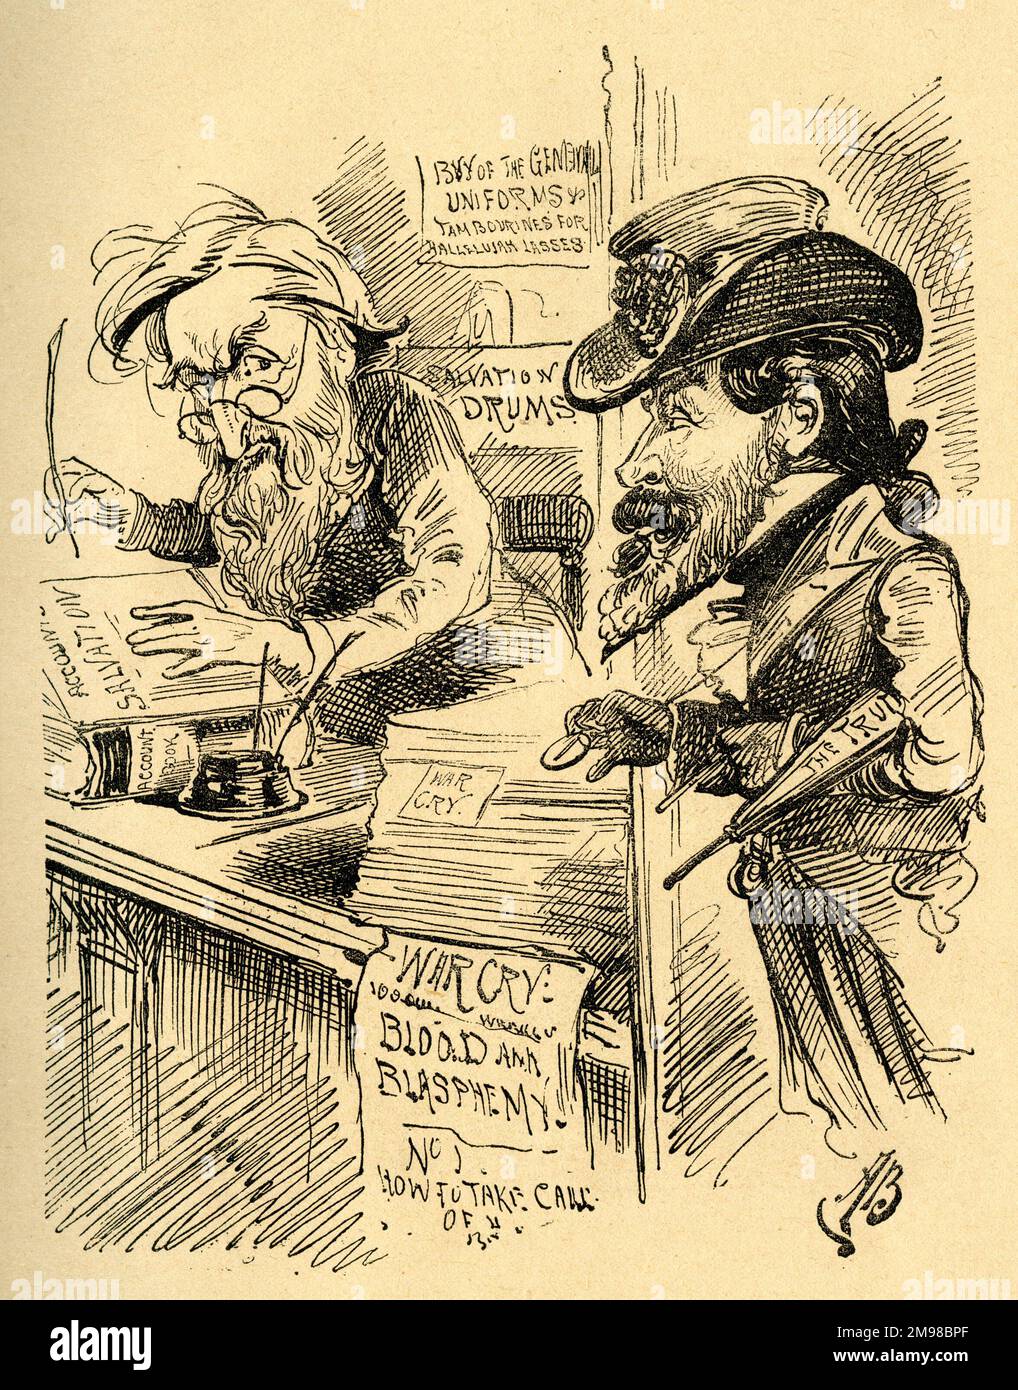 Cartoon, The War Cry (published by General William Booth, founder of the Salvation Army) v. The Truth (published by Henry Labouchere, Liberal MP and owner-editor).  Labouchere says: I hope I don't intrude, General, but -- touching that petty cash! Stock Photo